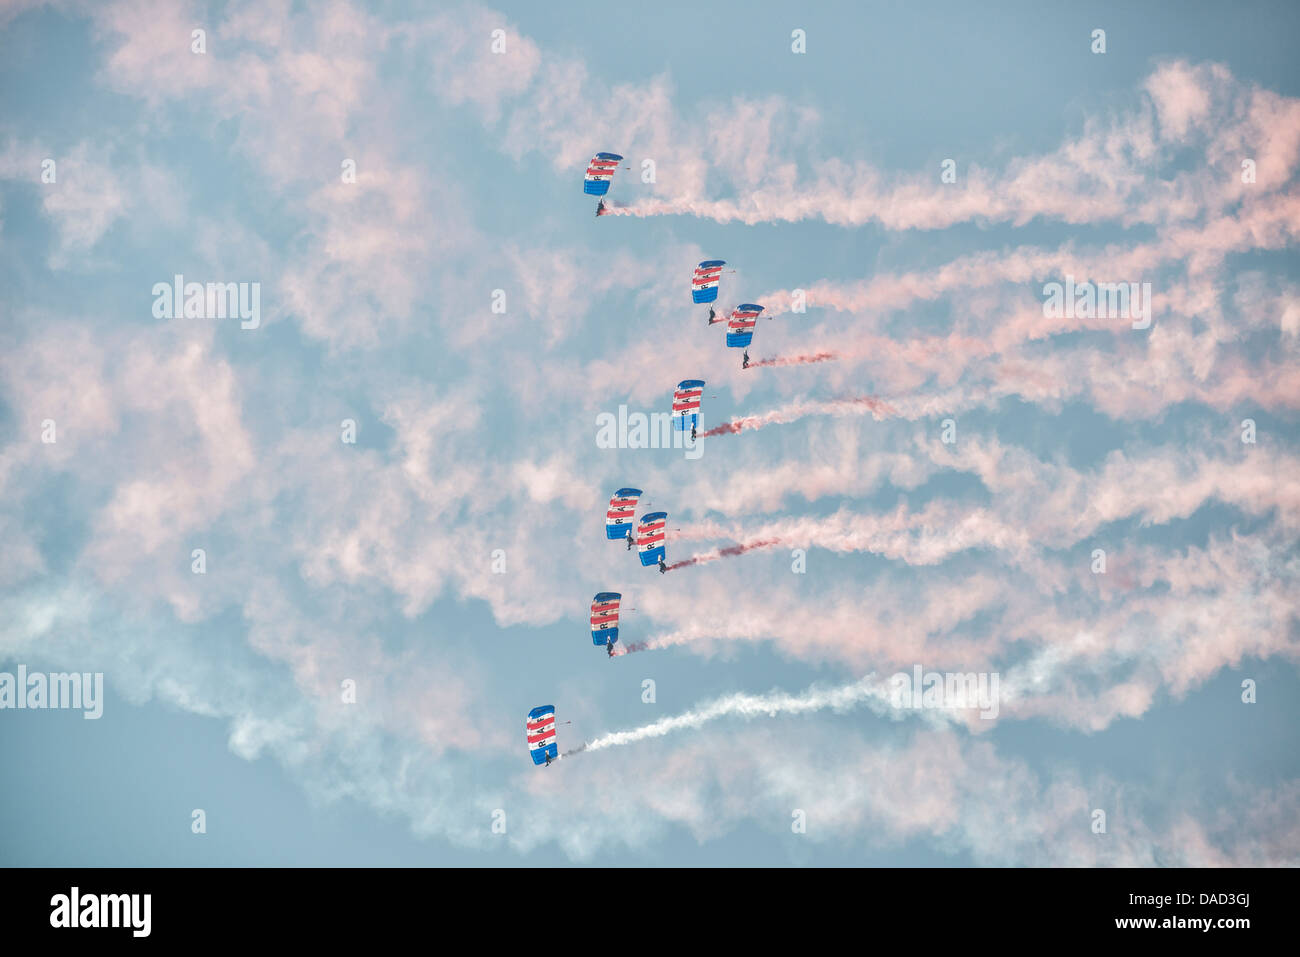 Skydivers from the Royal Air Force Falcons display team fill the sky with their colourful parachute canopies and smoke trails. Stock Photo